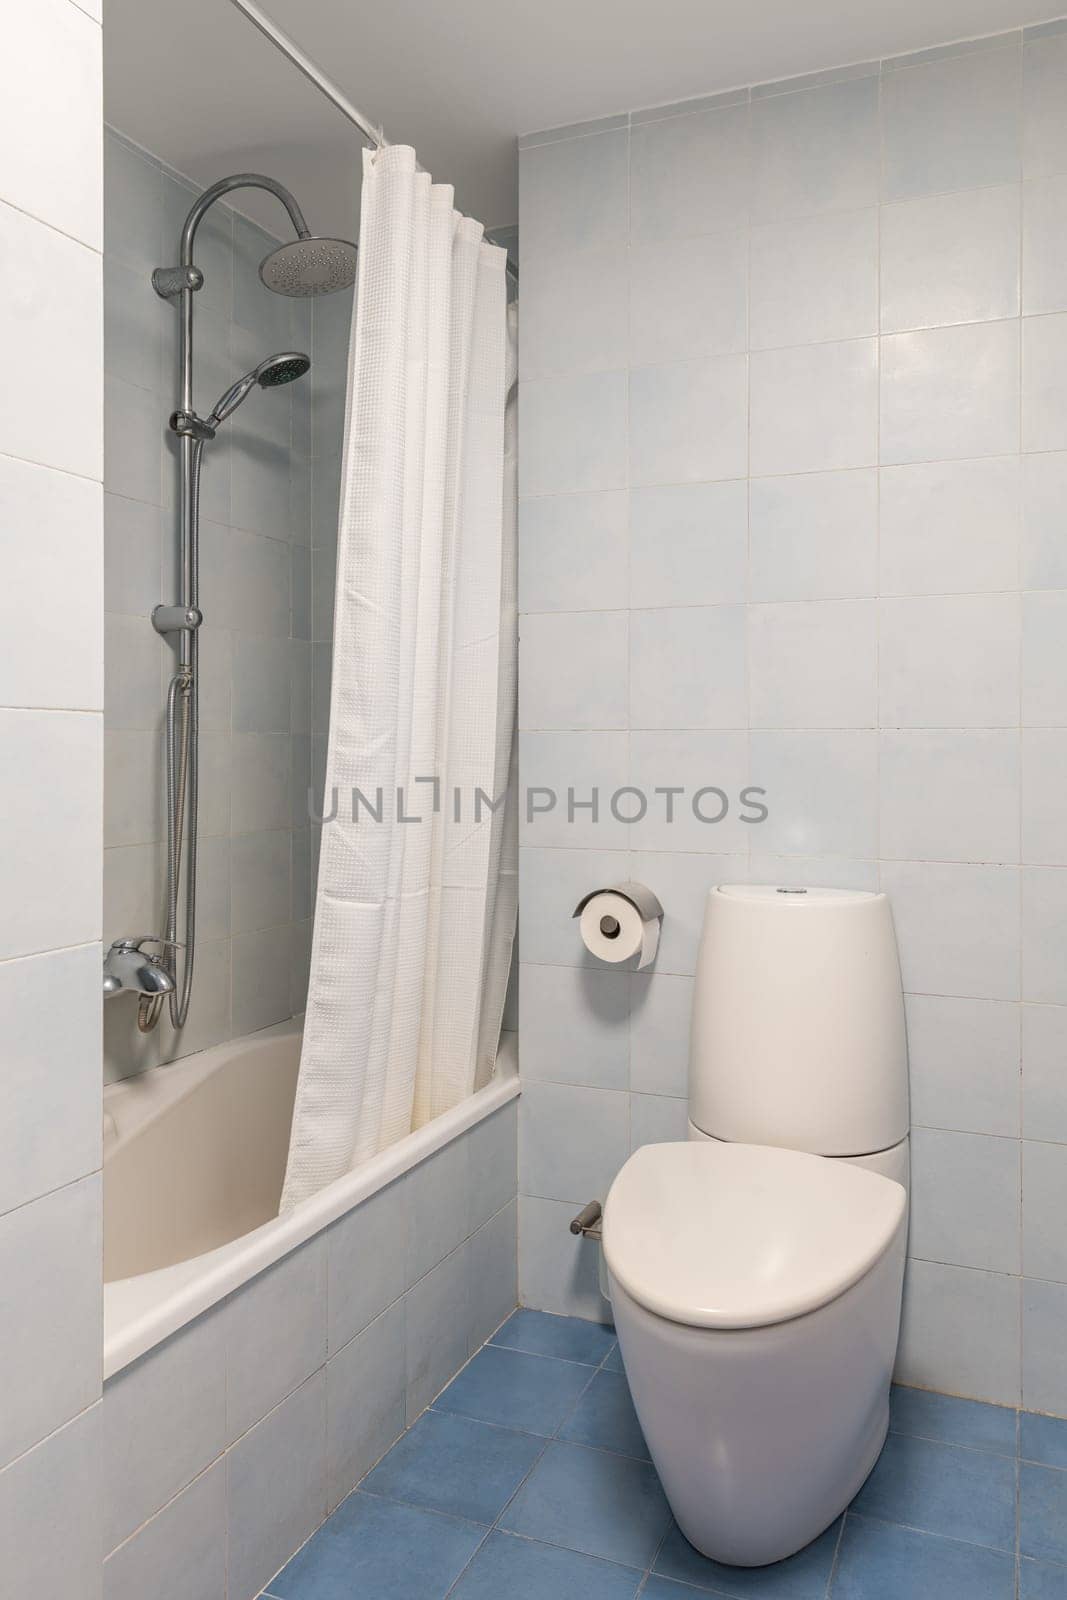 Toilet bowl near bathtub with shower in reconstructed bathroom. Equipment of personal hygiene in hotel room. Clean tiled restroom at home